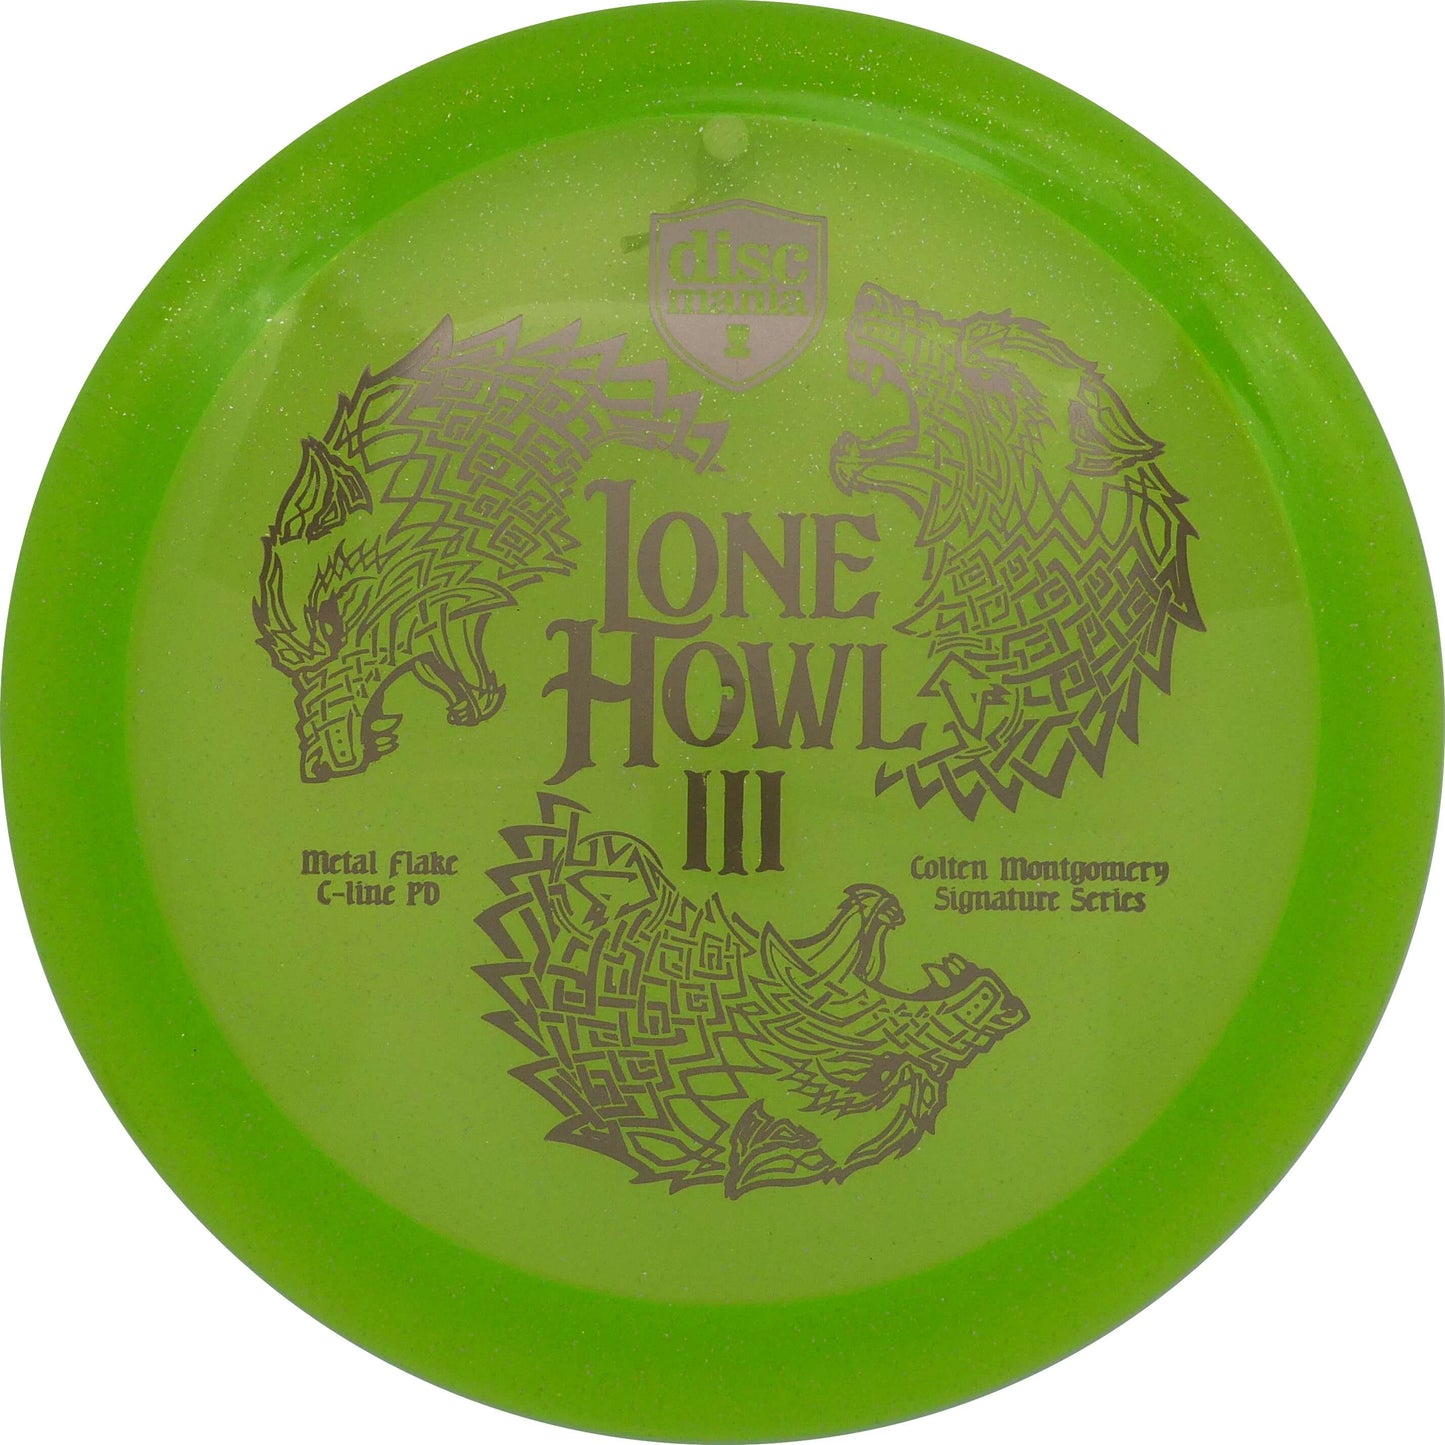 Lone Howl 3 Colten Montgomery Signature Series Metal Flake C-Line PD 170-172g